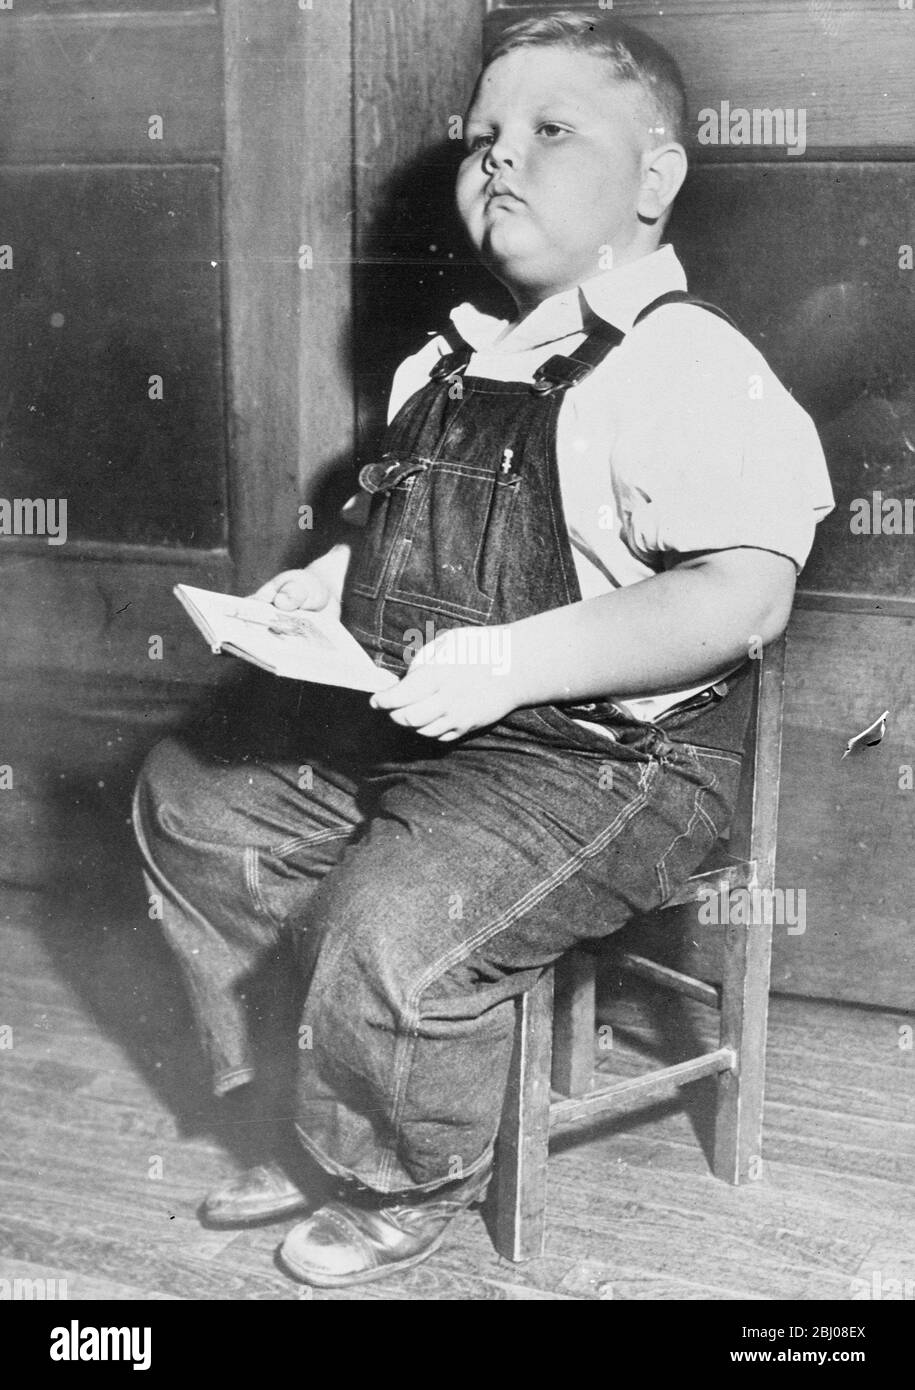 'Chunky'!. - Five-year-old boy ways hundred and 110 pounds. - Five-year-old Laurence J Rudy, Jr, of Kansas, Missouri, who weighs 110 pounds, wears overalls made for an 18-year-old and size 16 in shirts. - Lawrence is known to his school friends by the apt nickname 'Chunky'. Despite his bulk, he is an intelligent, alert pupil. - 19 October 1937 - Stock Photo